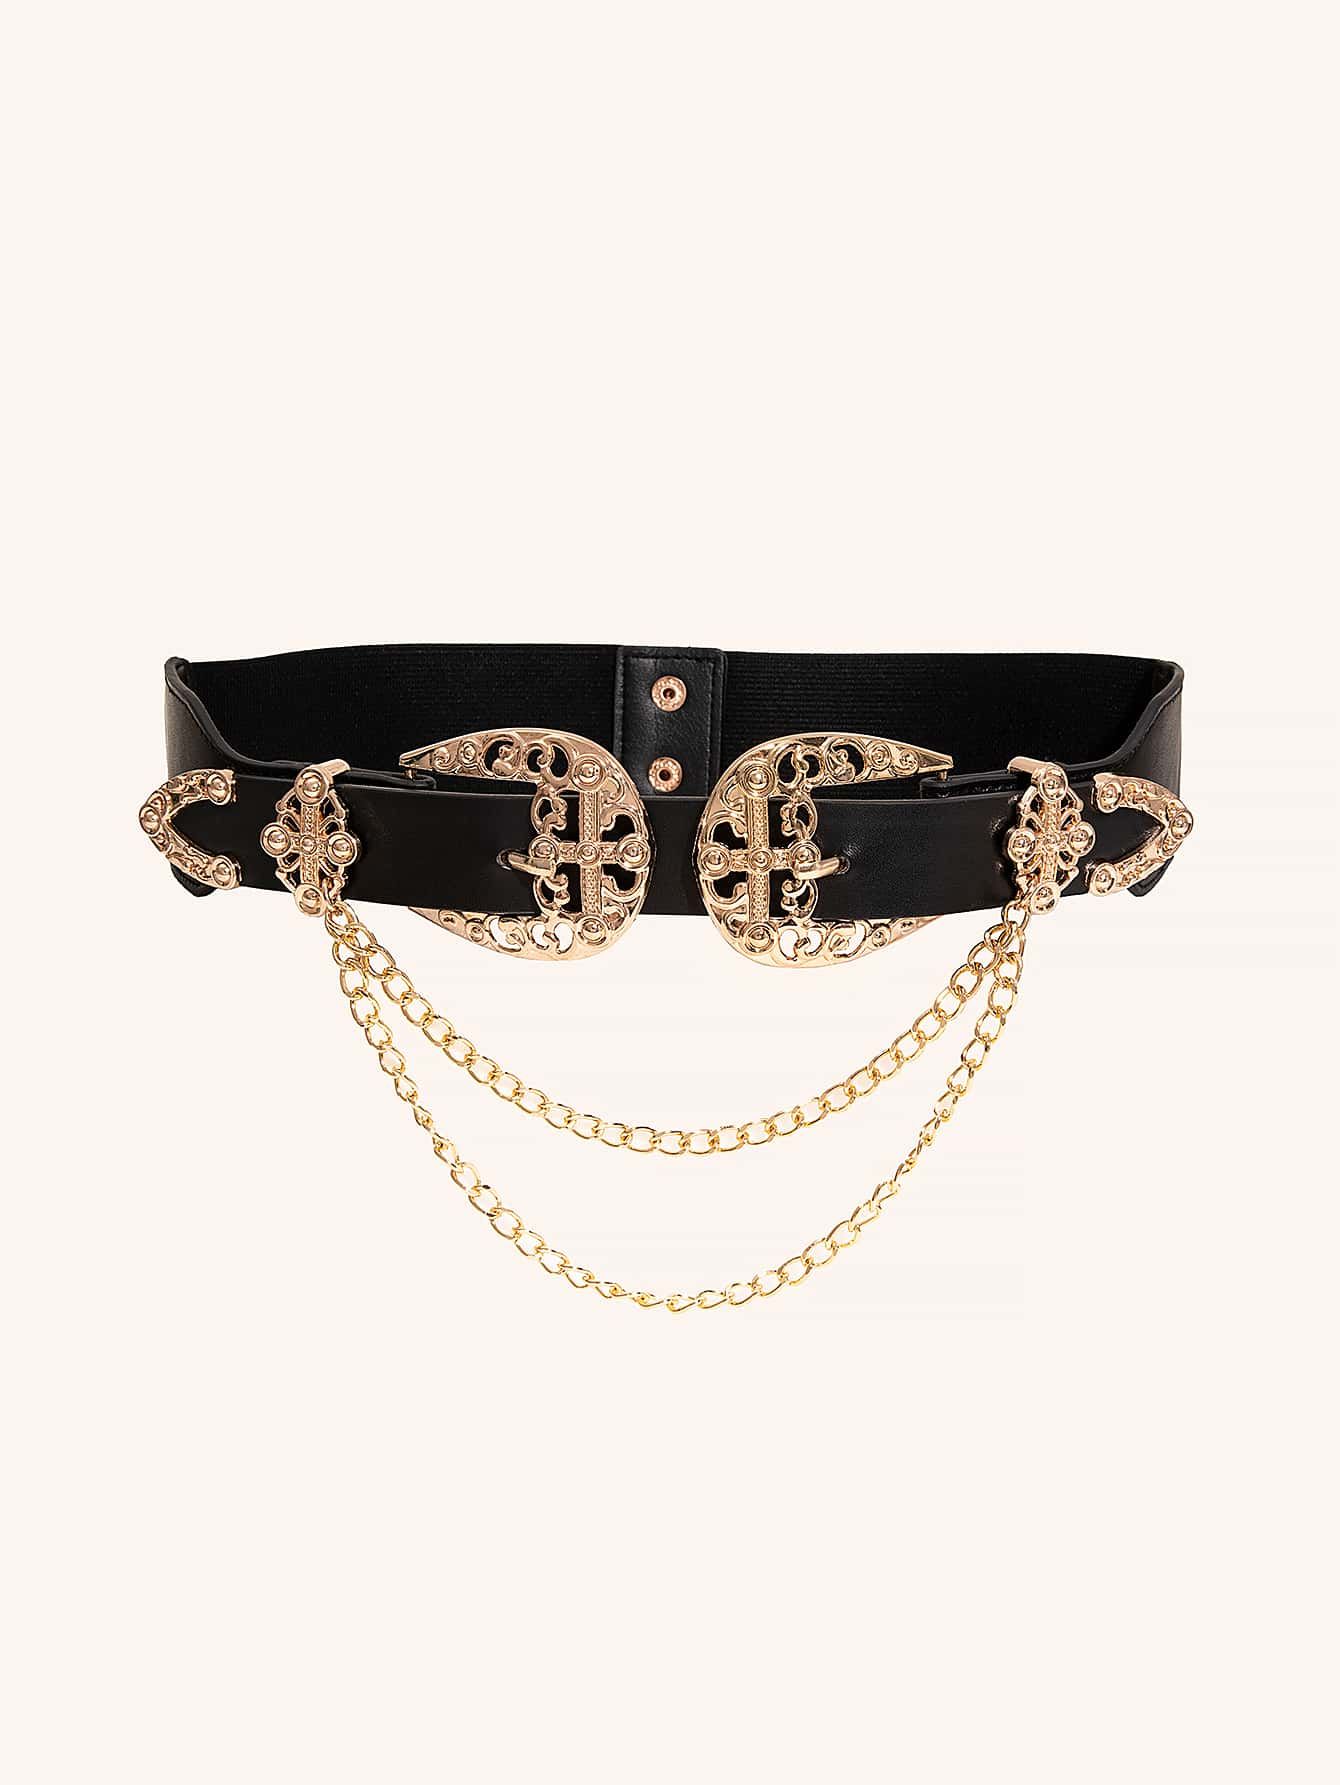 1pc Double Buckle Hollow Out Chain Detail Elastic Waist Belt For Women | SHEIN